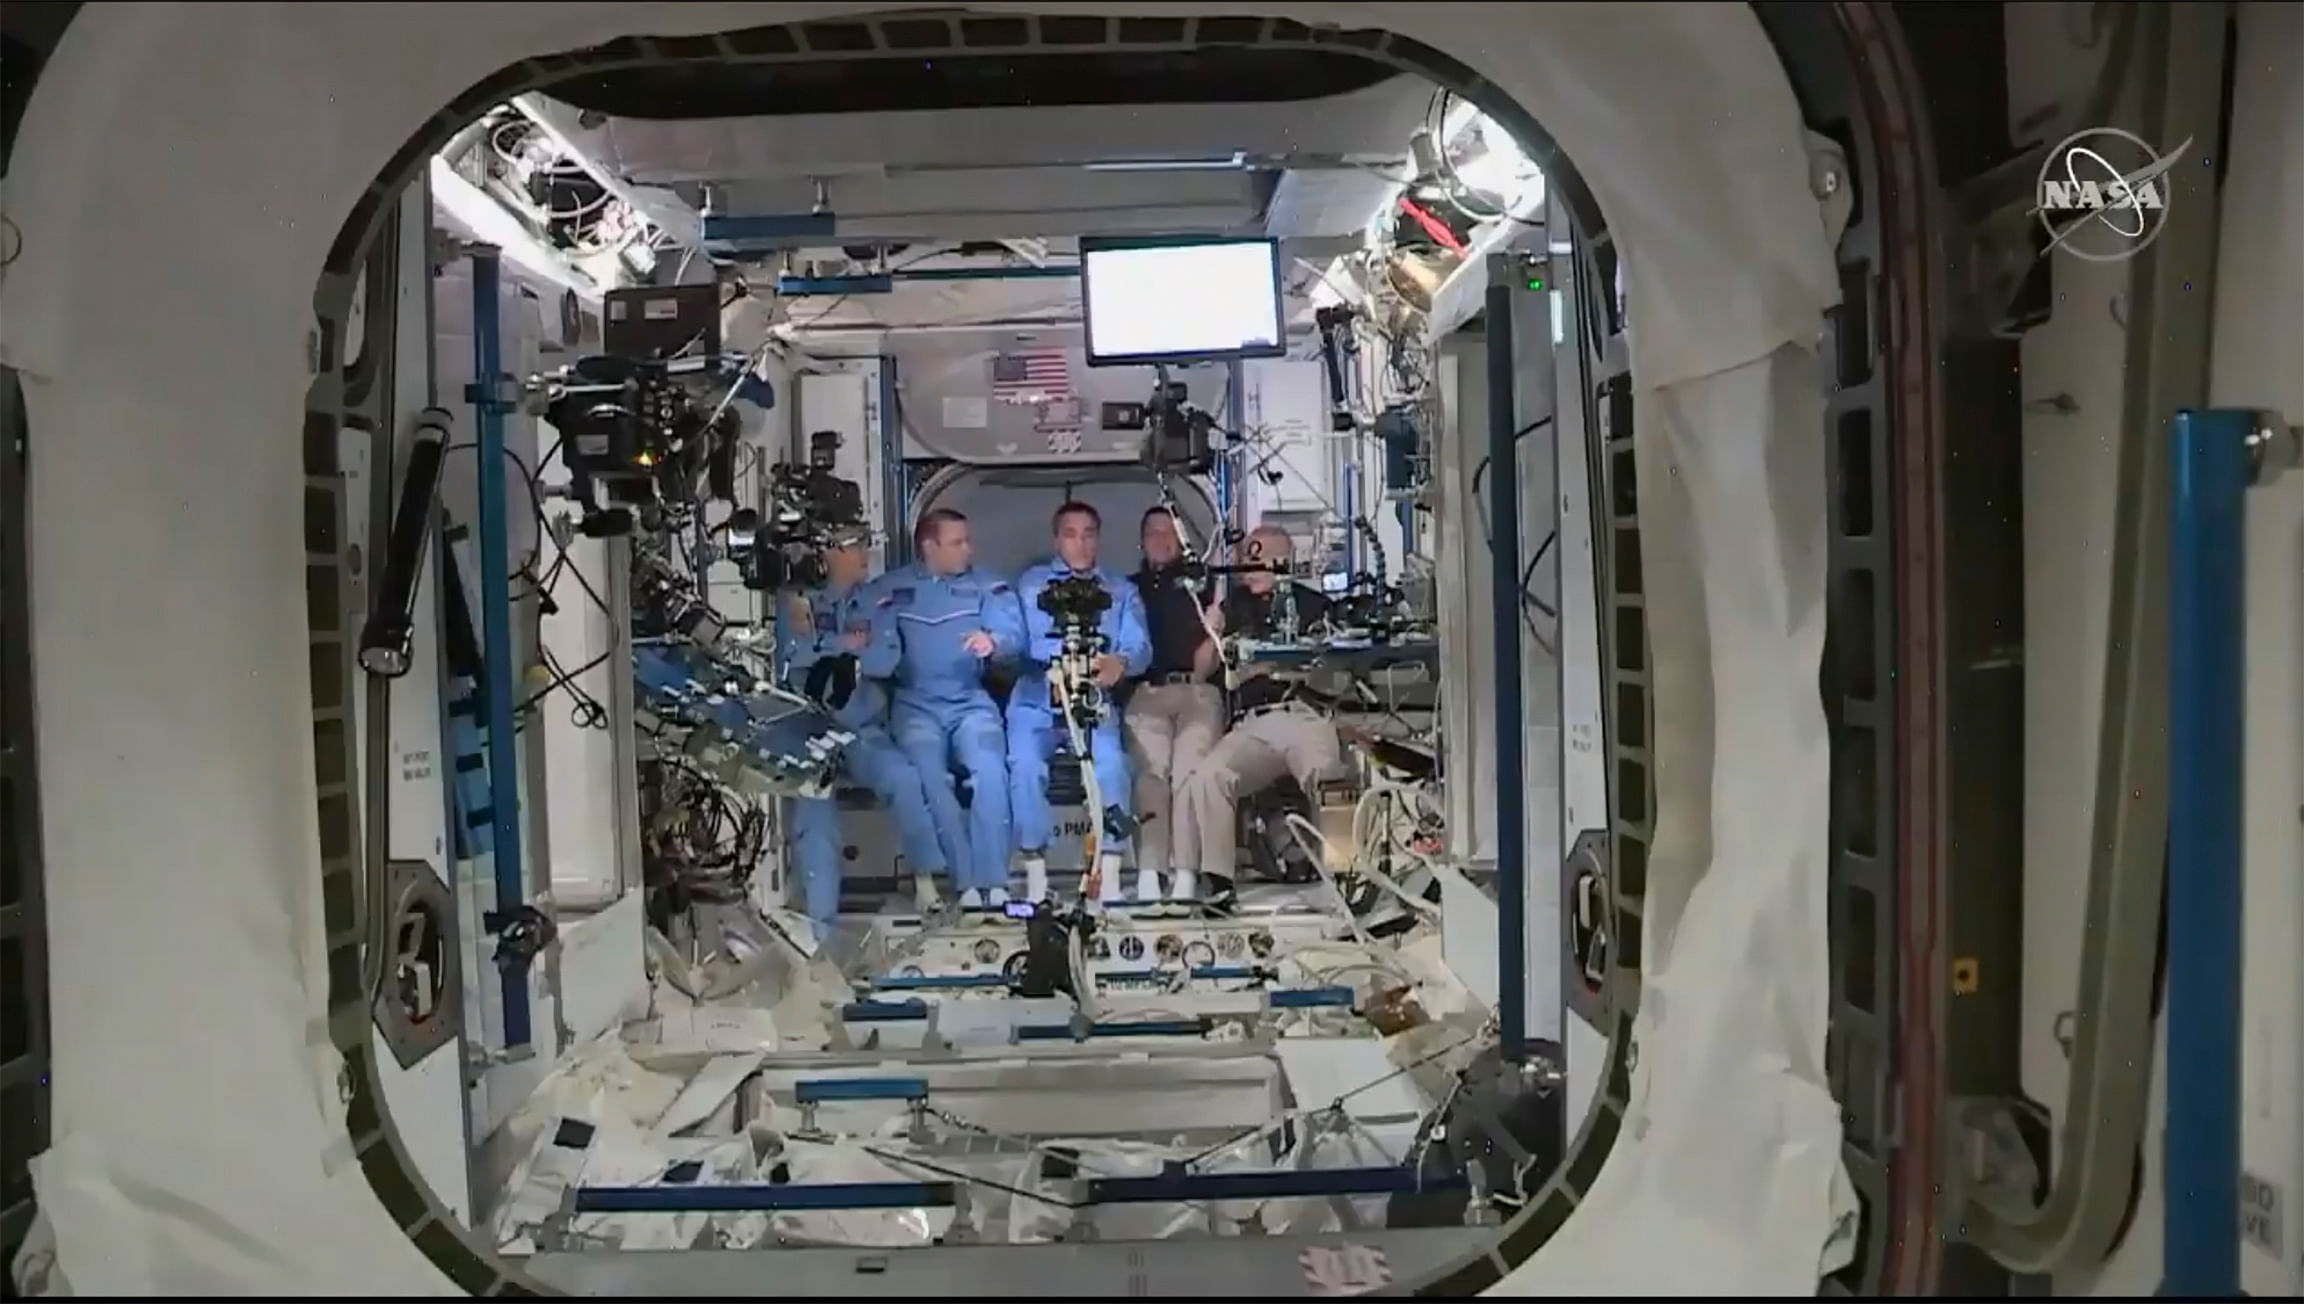 This NASA video frame grab image shows NASA SpaceX’s Crew Dragon astronauts Douglas Hurley(R) and Robert Behnken(2ndR) arriving after the hatch opened to the International Space Station, posing with other astronauts. (AFP image)